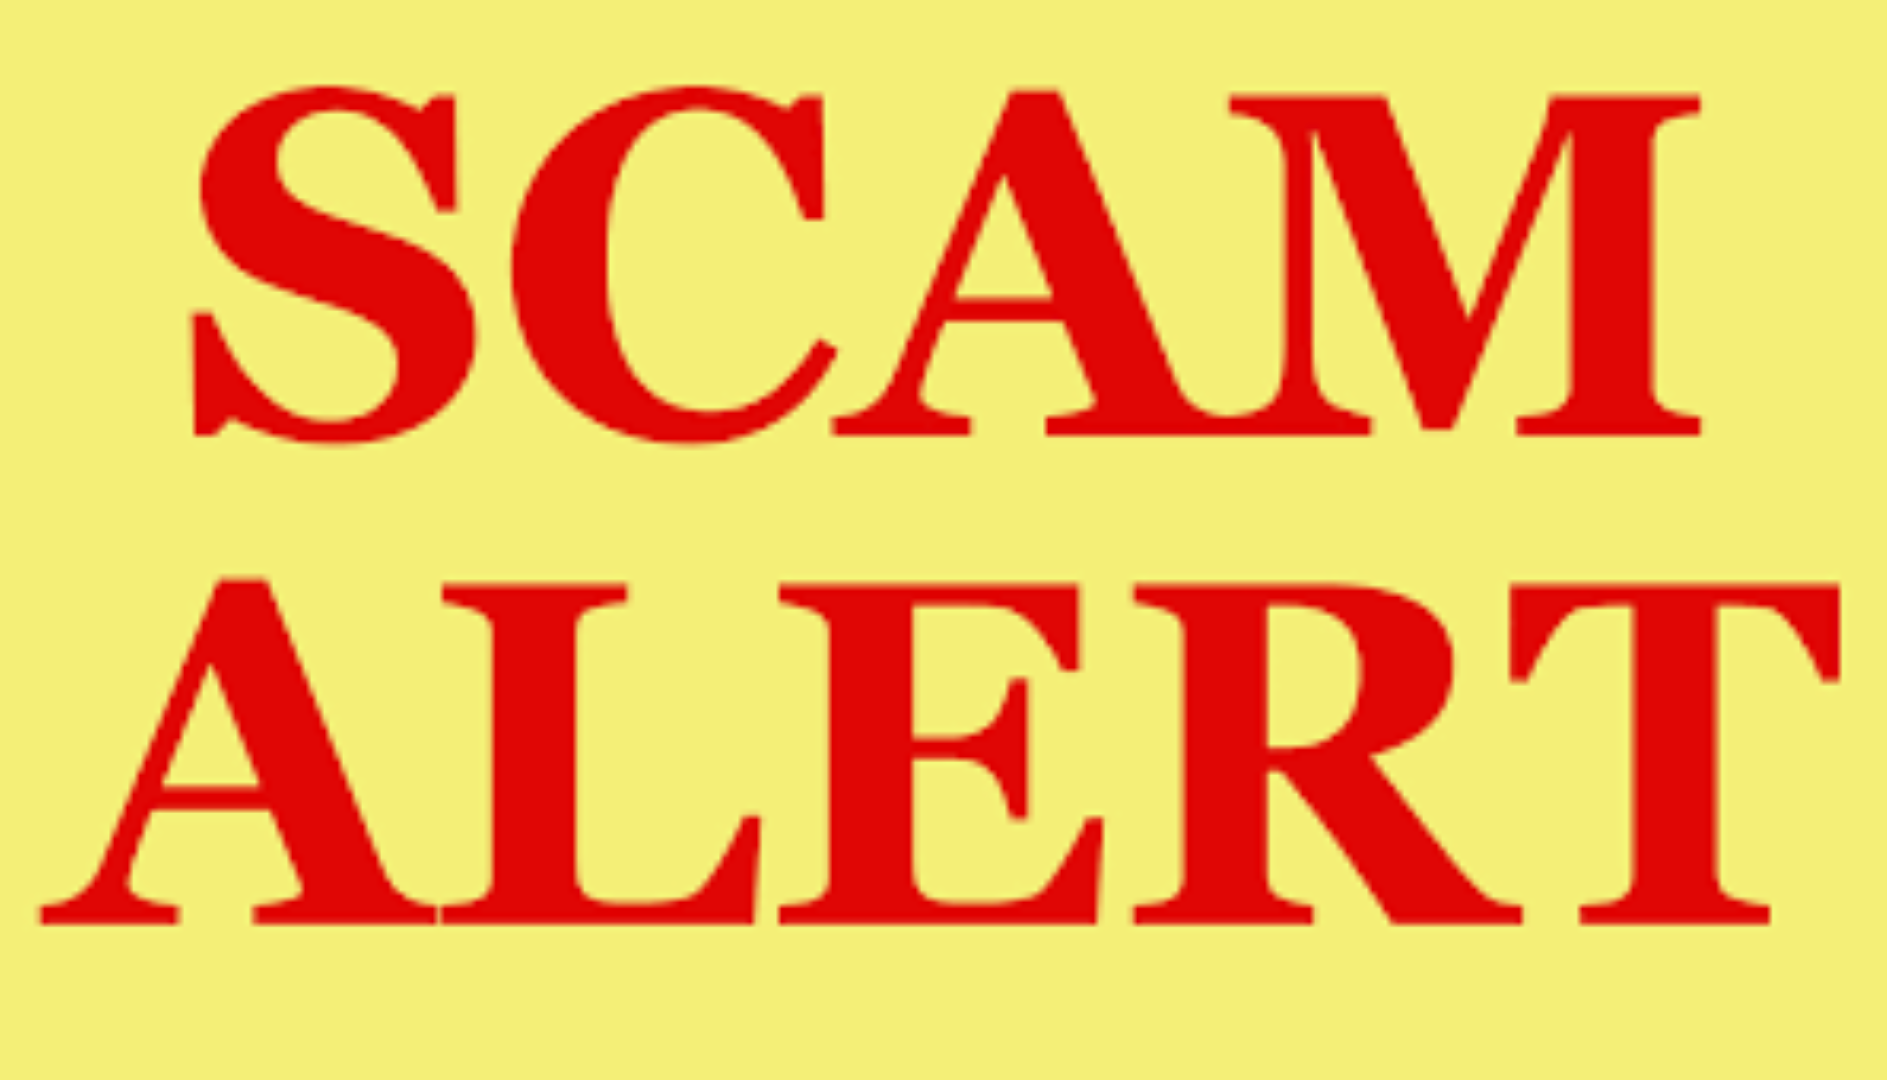 Scam Alert: Youths for Youth Initiative (YFYI)